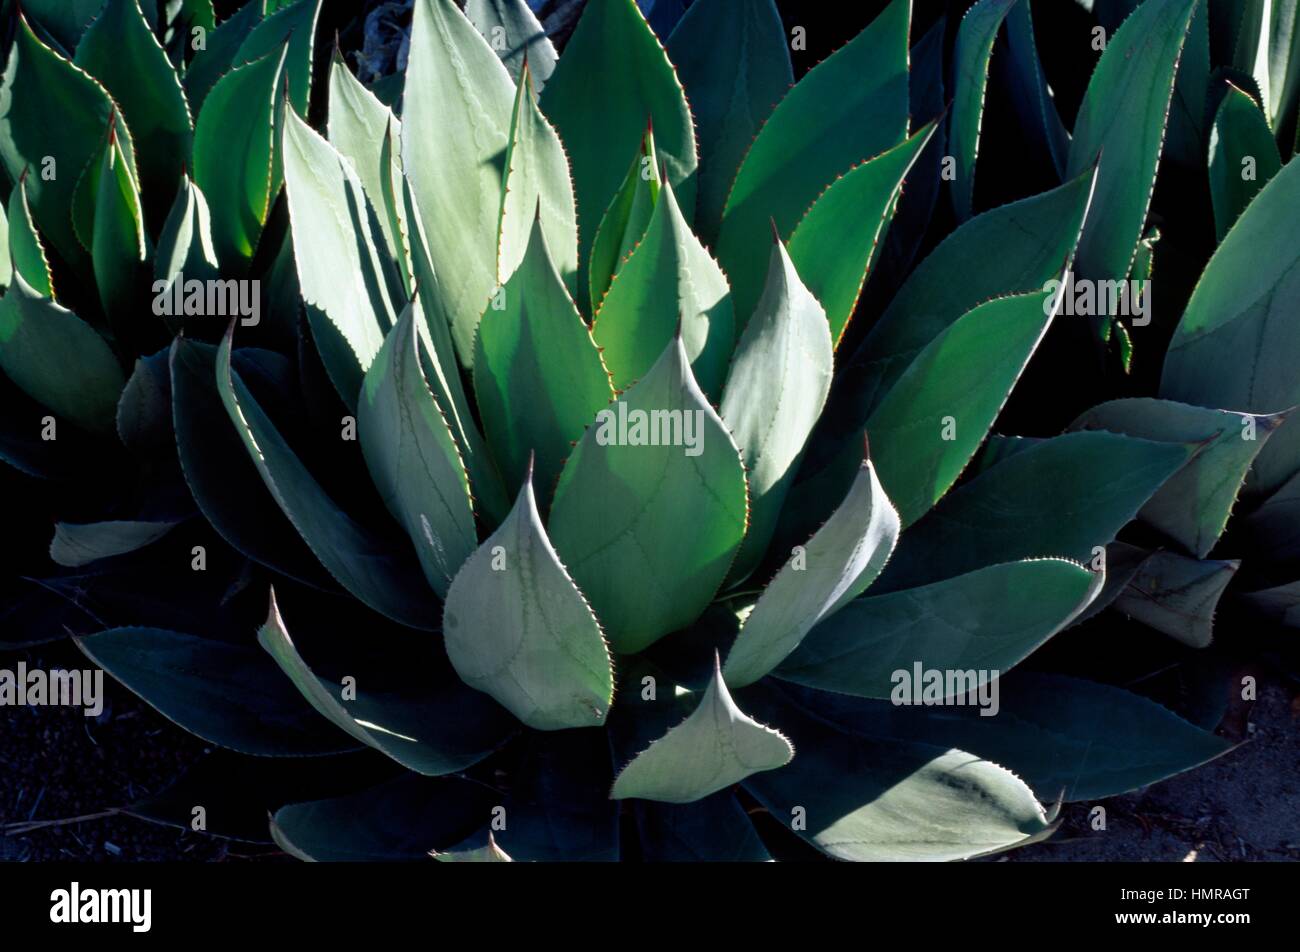 Agave or century plant (Agave sp), Agavaceae. Stock Photo